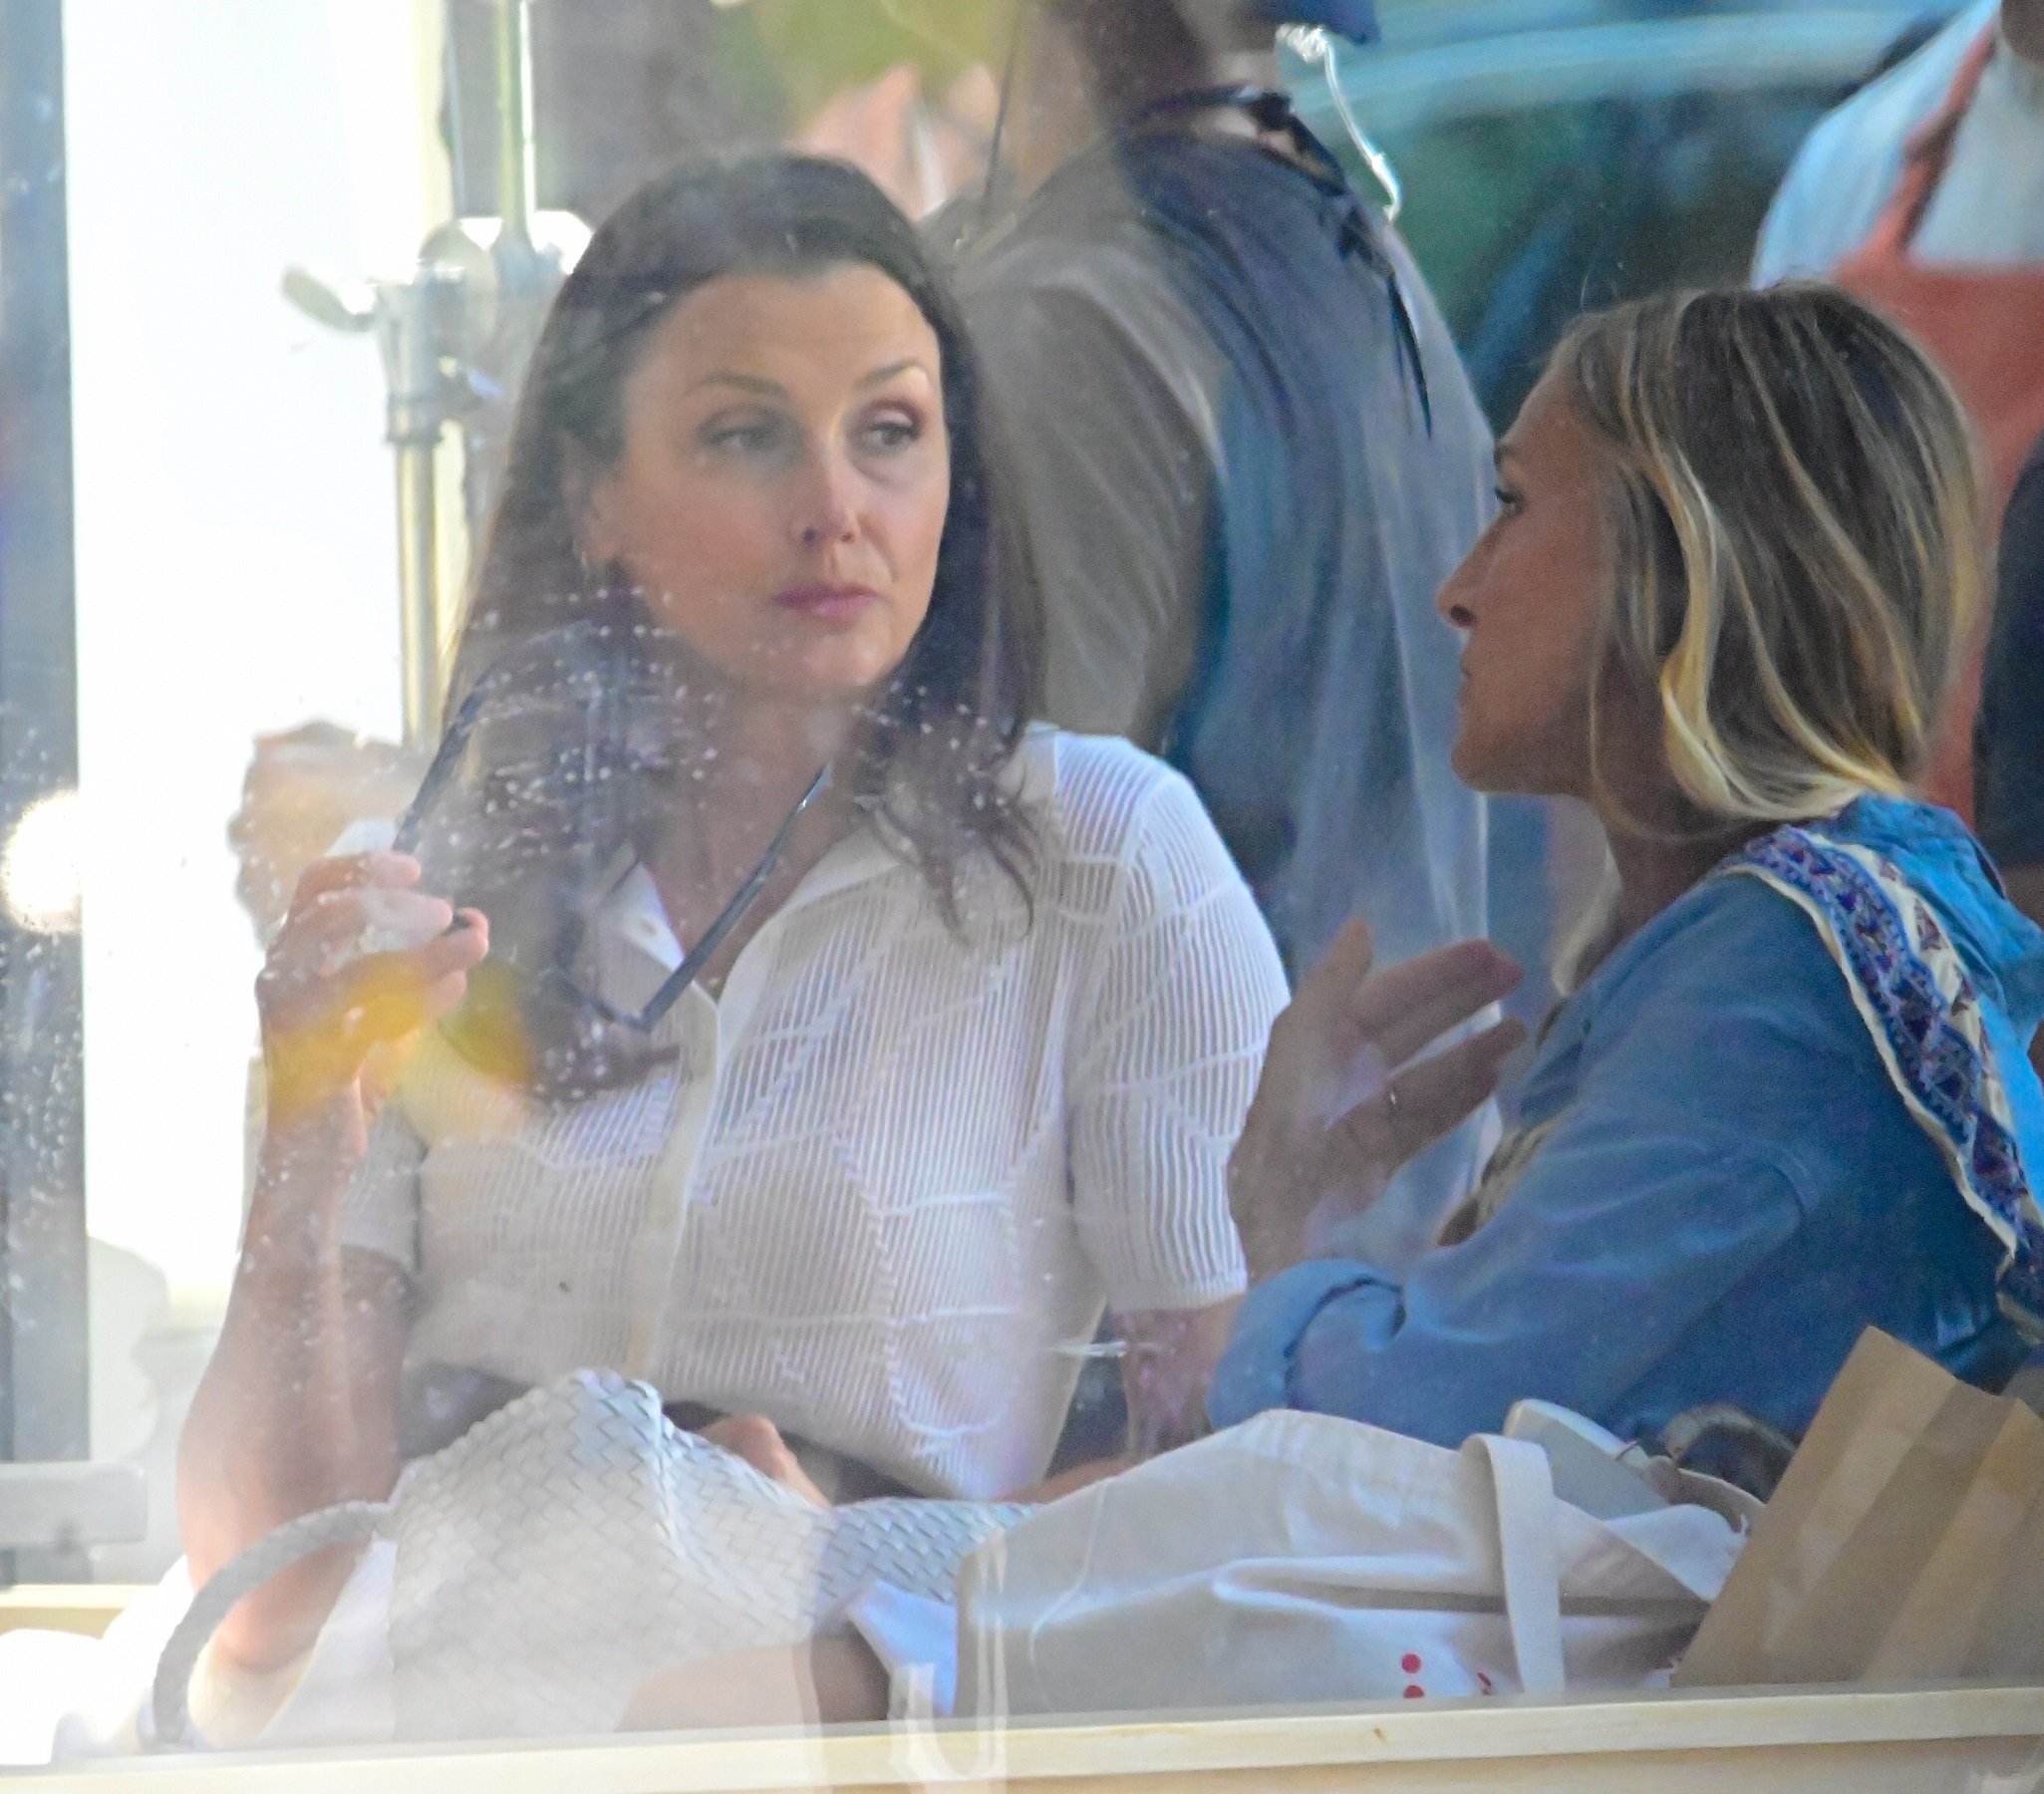 Bridget Moynahan and Sarah Jessica Parker are scene on the set of 'And Just Like That...' the 'Sex and the City' reboot